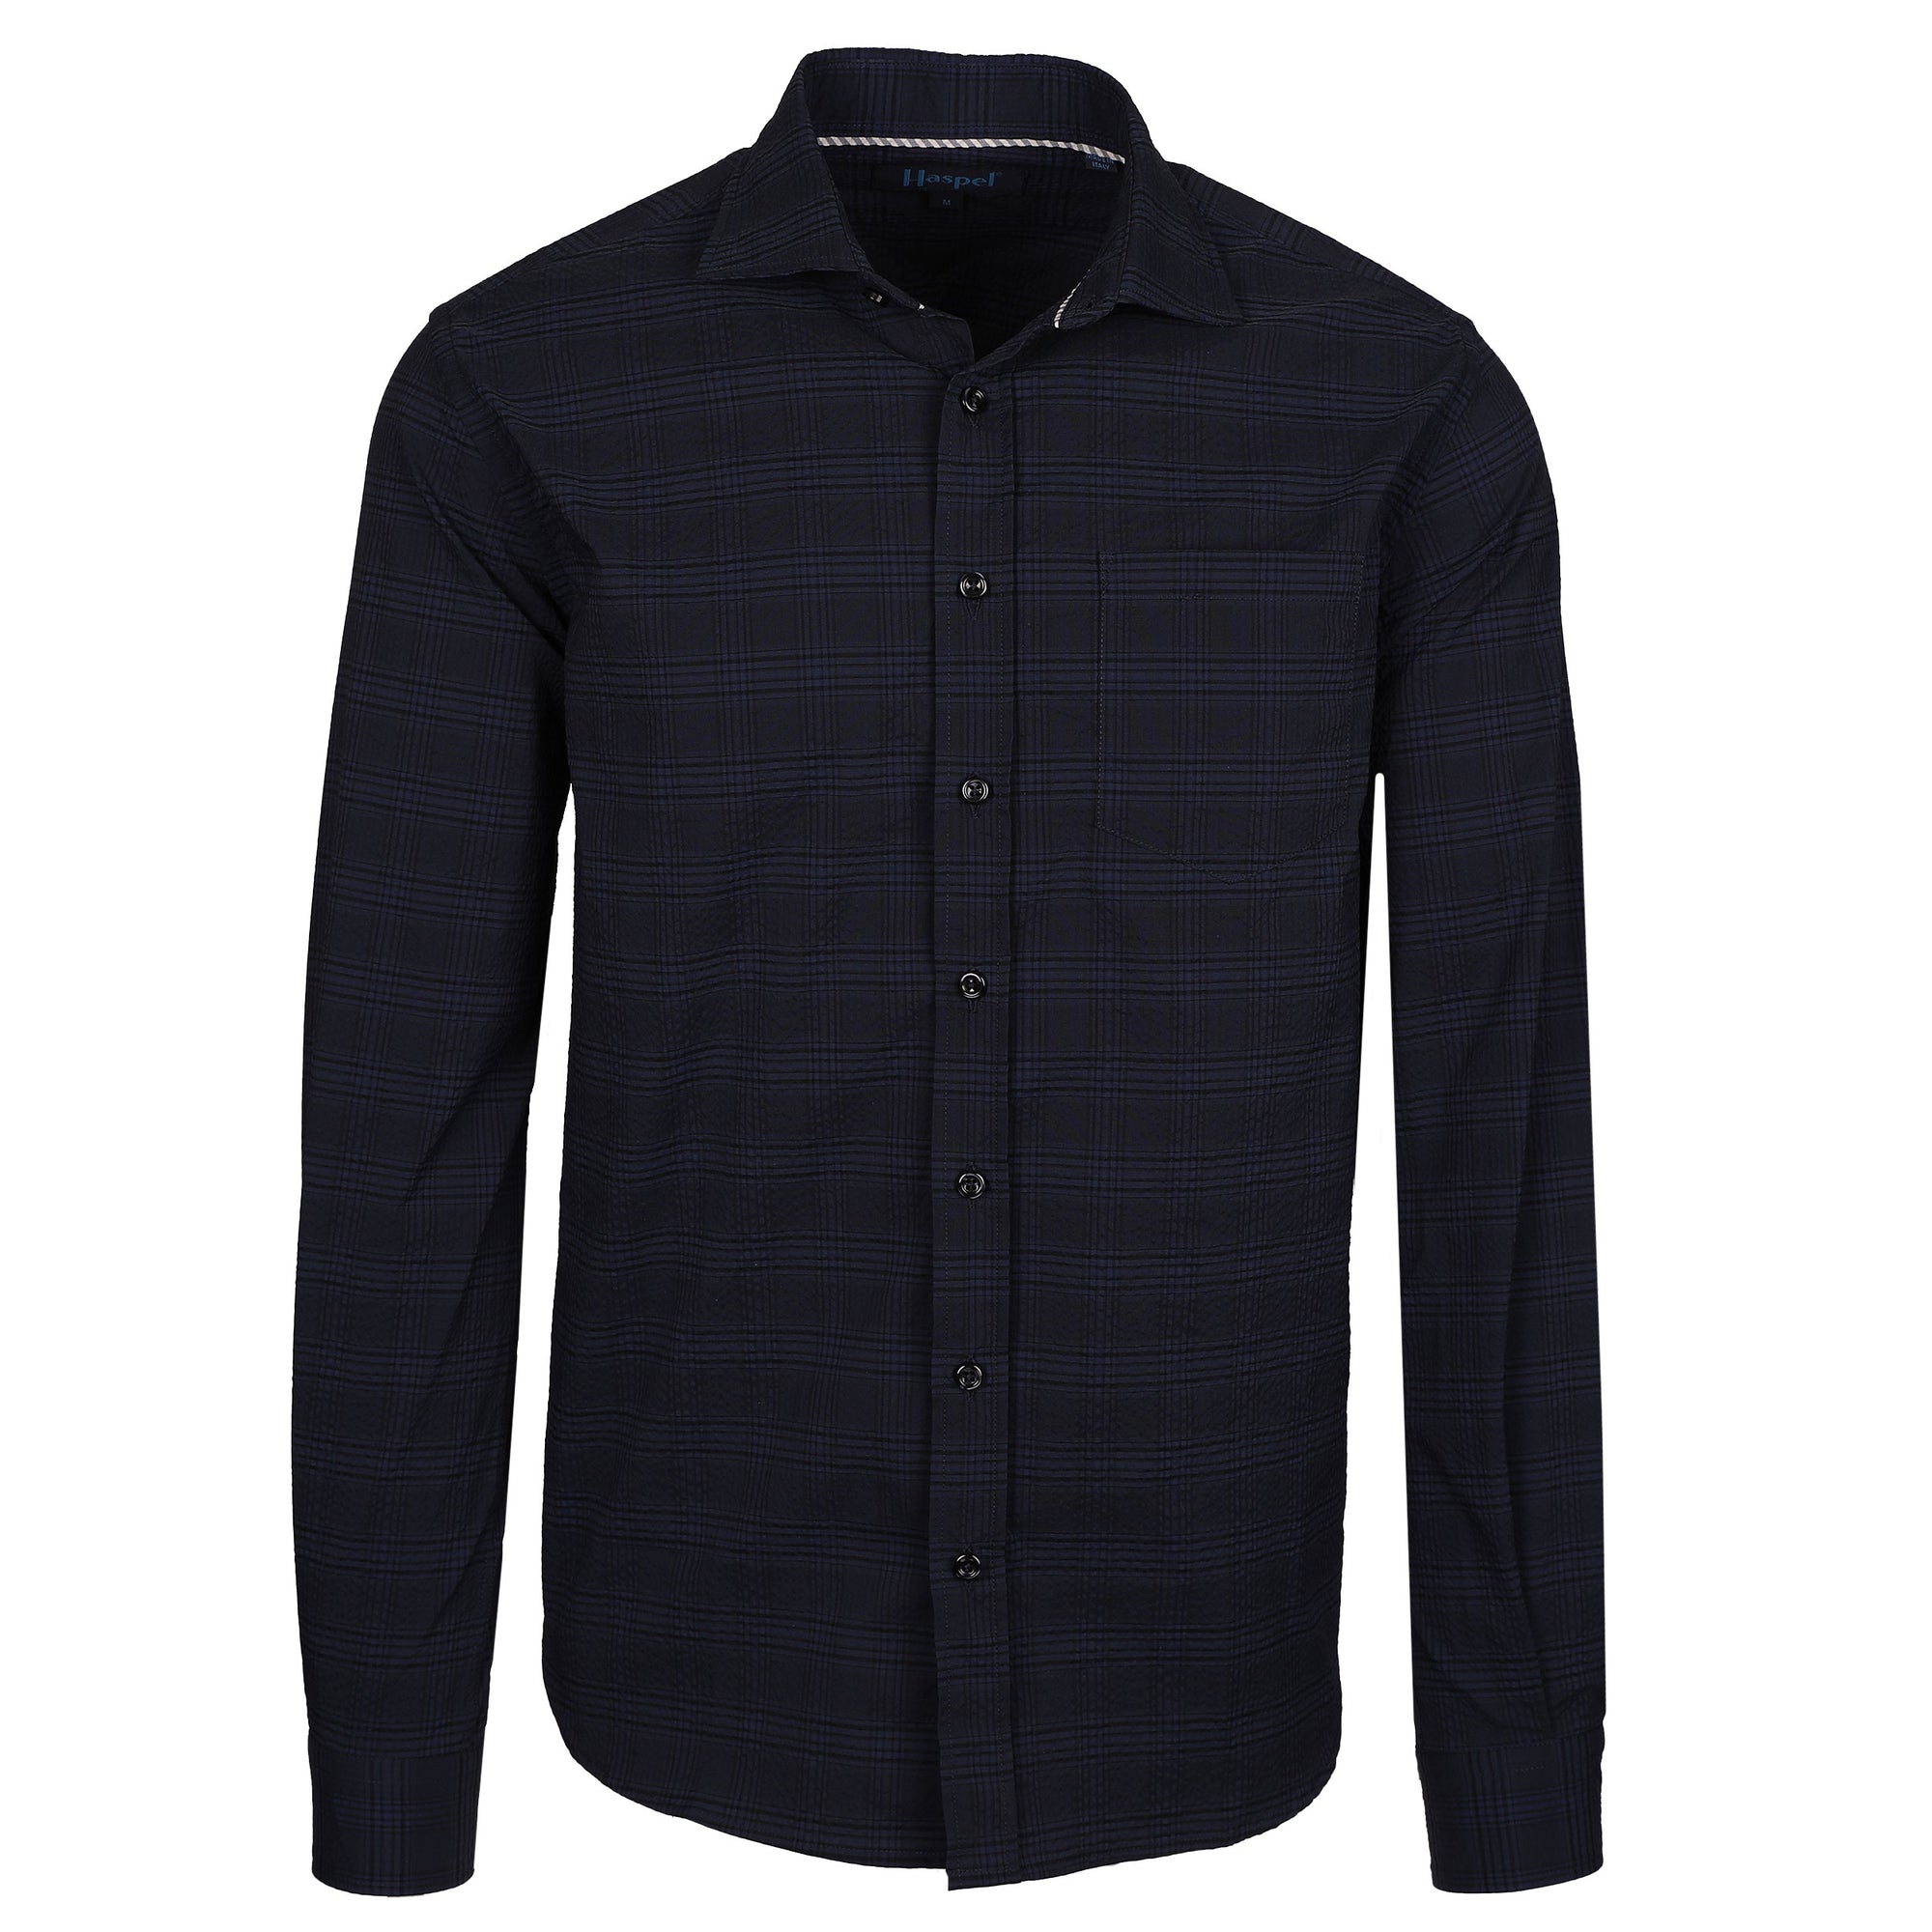 The Chartres Navy Seersucker Check provides classic sophistication. Made from navy seersucker, its timeless design adds elegance to any outfit.   100% Cotton • Spread Collar with Removable Collar Stays • Long Sleeve • Chest Pocket • Machine Washable • Made in Italy • Return Policy